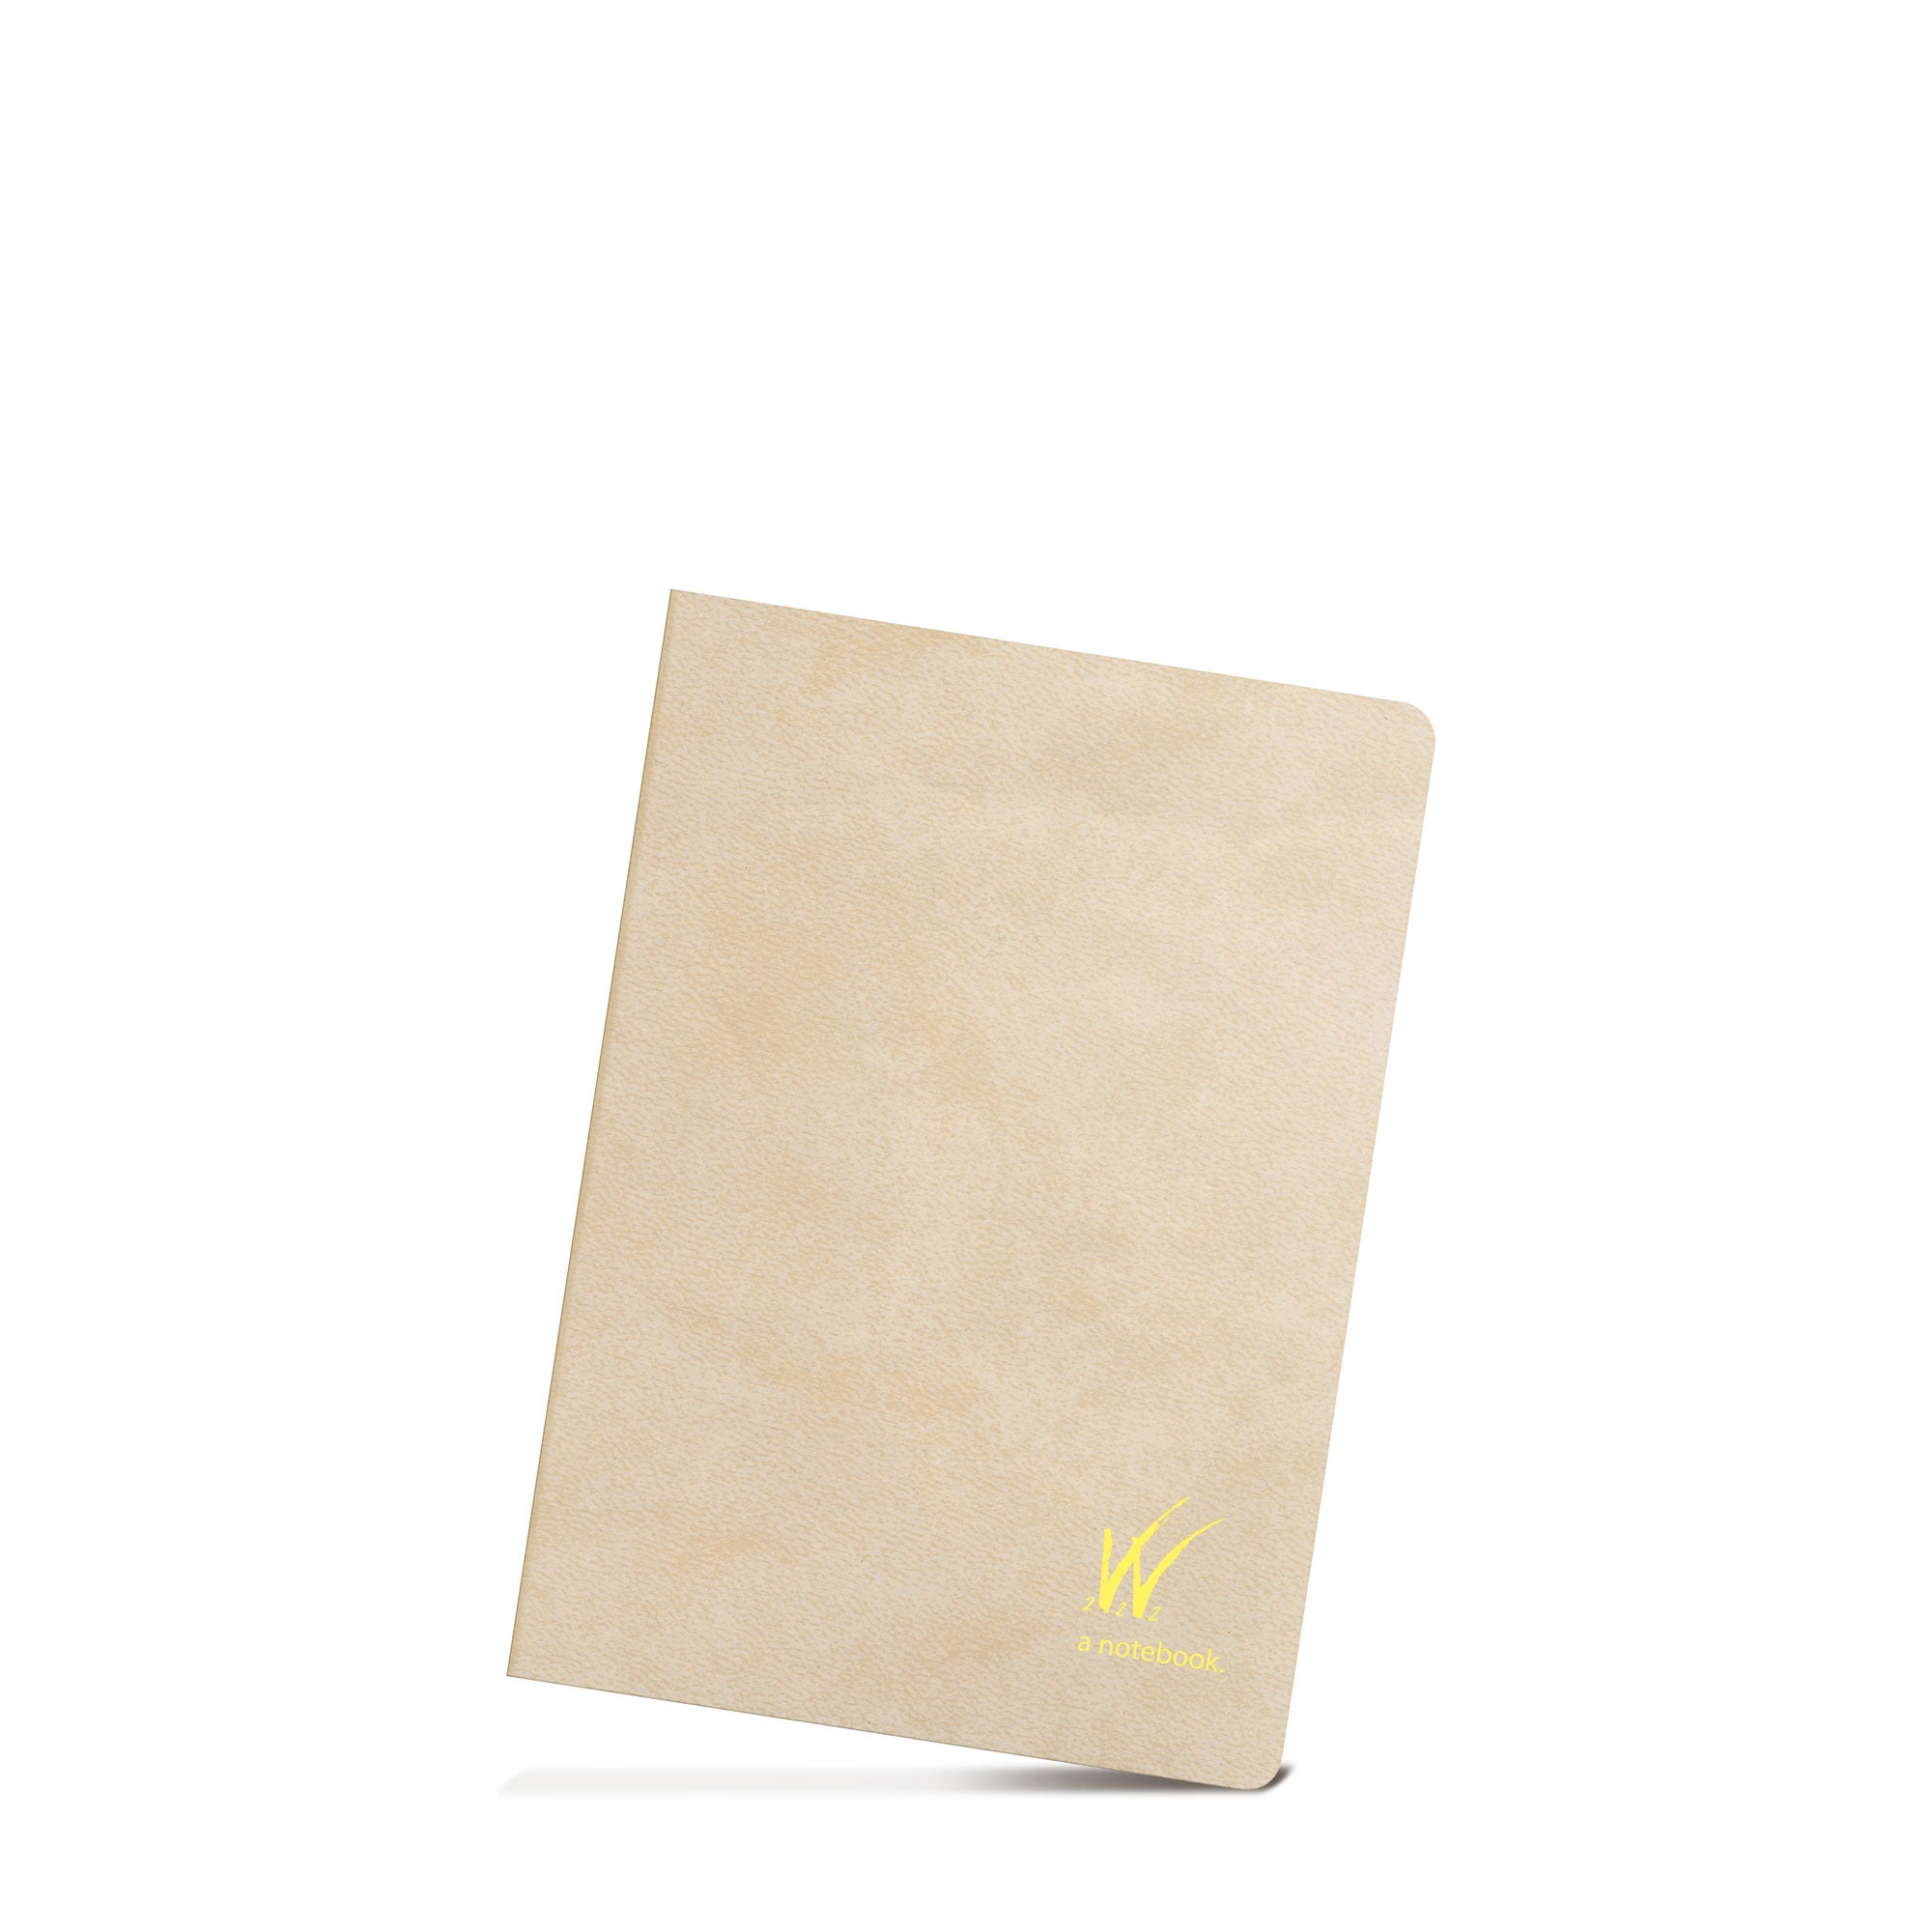 A6 Notebook Pumice (Cream) (368 pages) Tomoe River